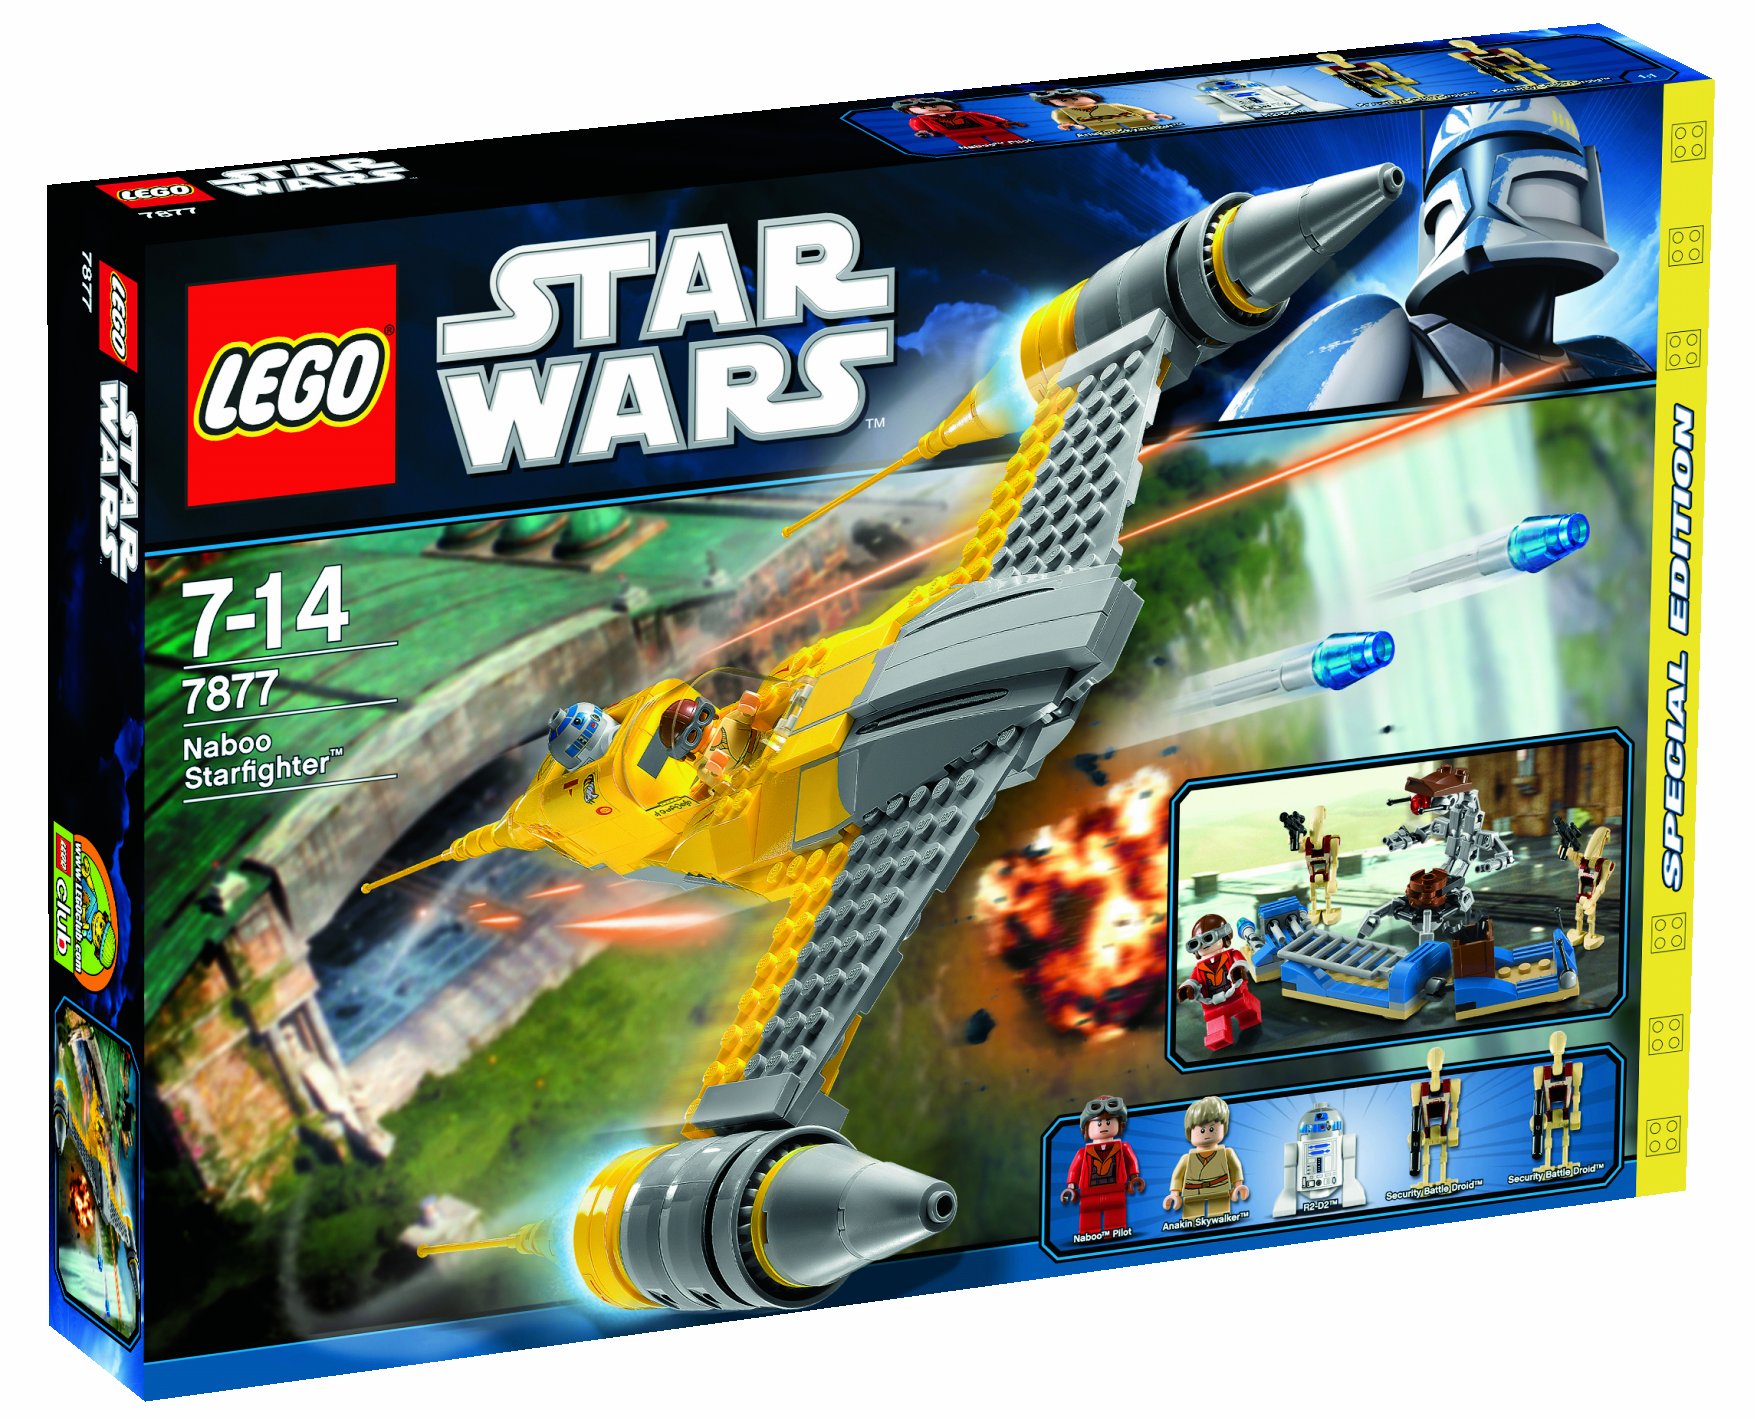 LEGO Star Wars Exclusive Special Edition Set #7877 Naboo Starfighter